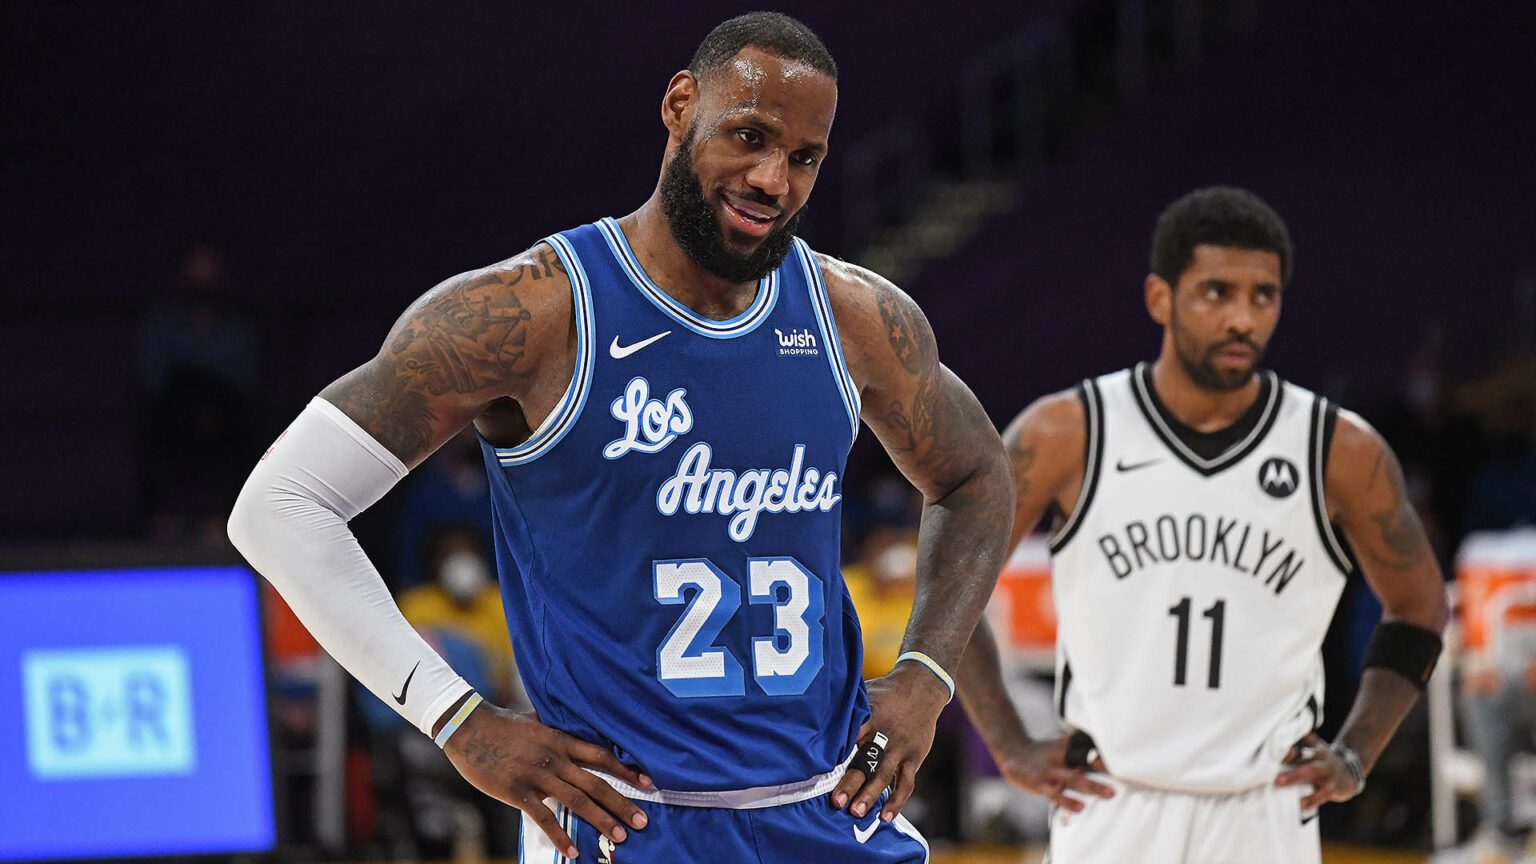 NBA Christmas Day will feature the Lakers and Nets